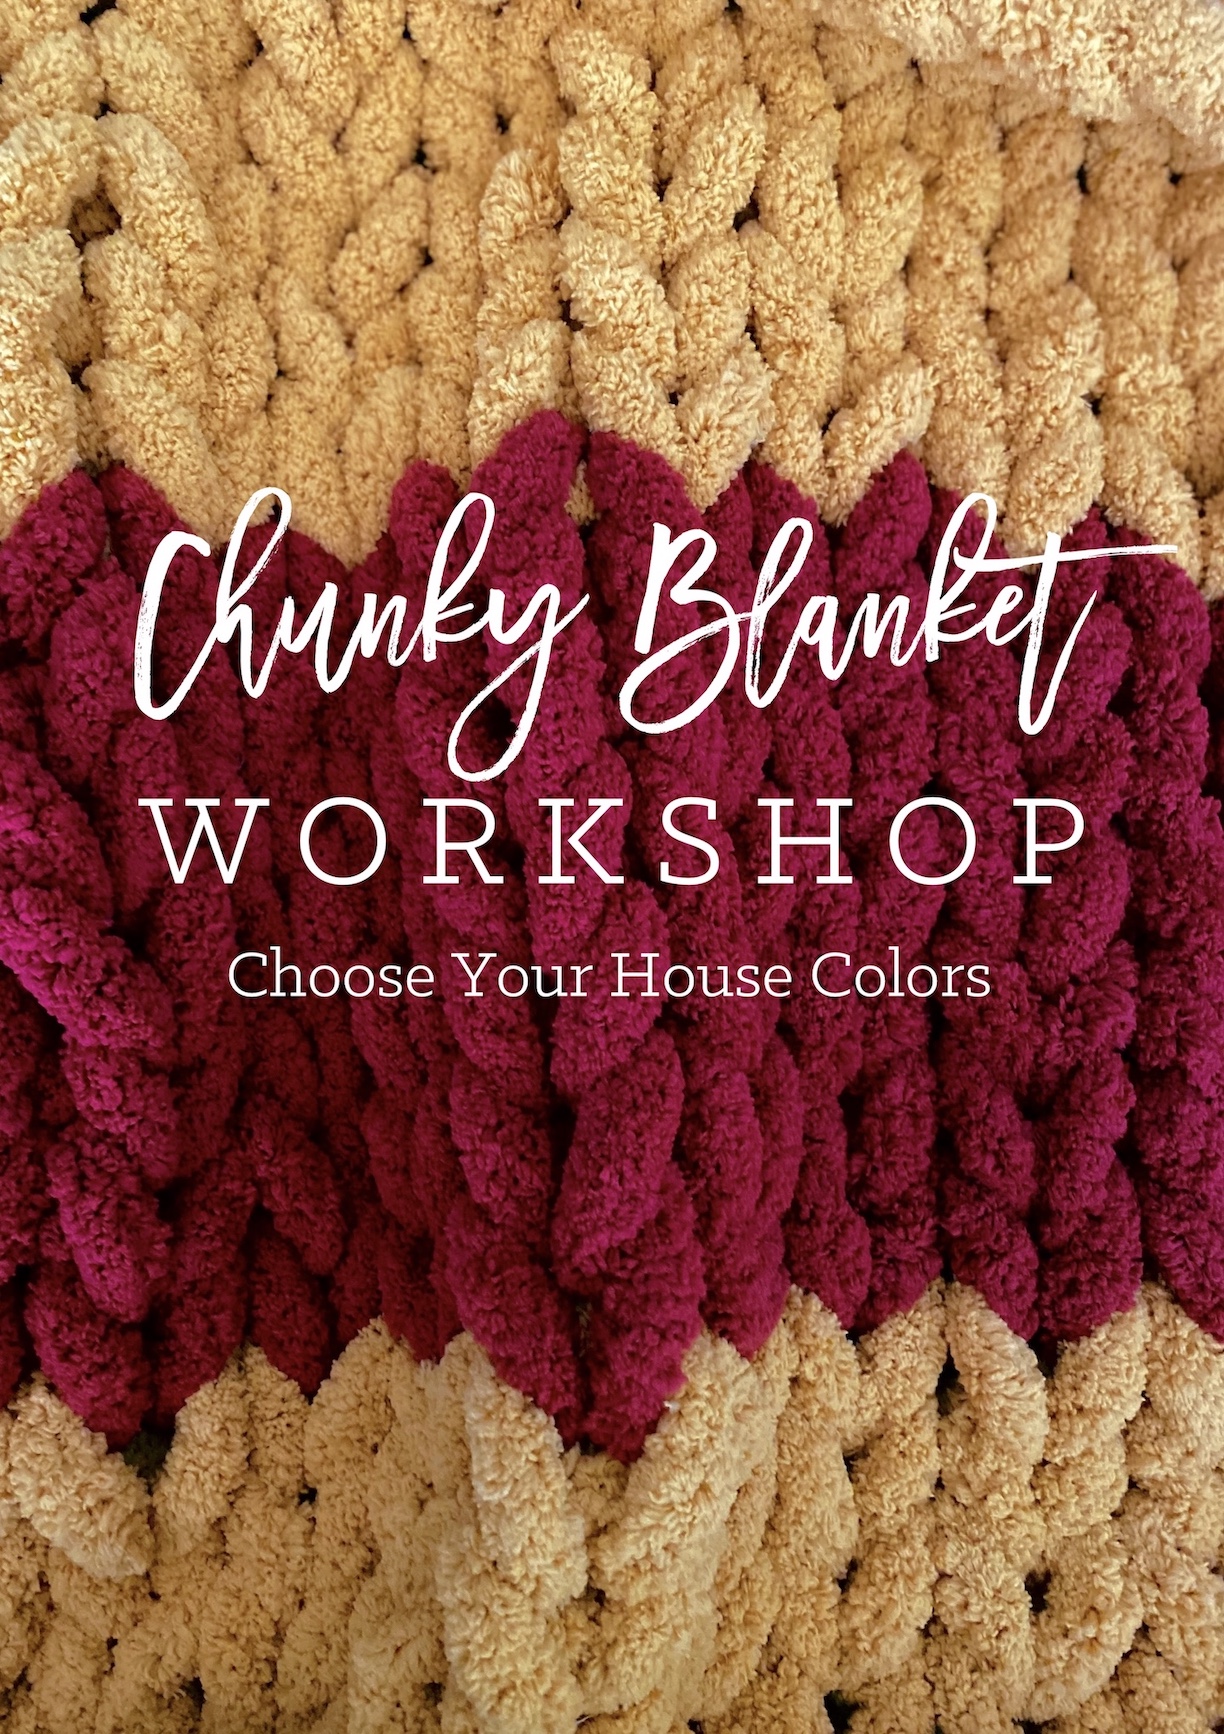 It's National College Colors Day! Drop your colors in the comments below  for a chance to win a Chunky Knit Blanket Workshop valued at…